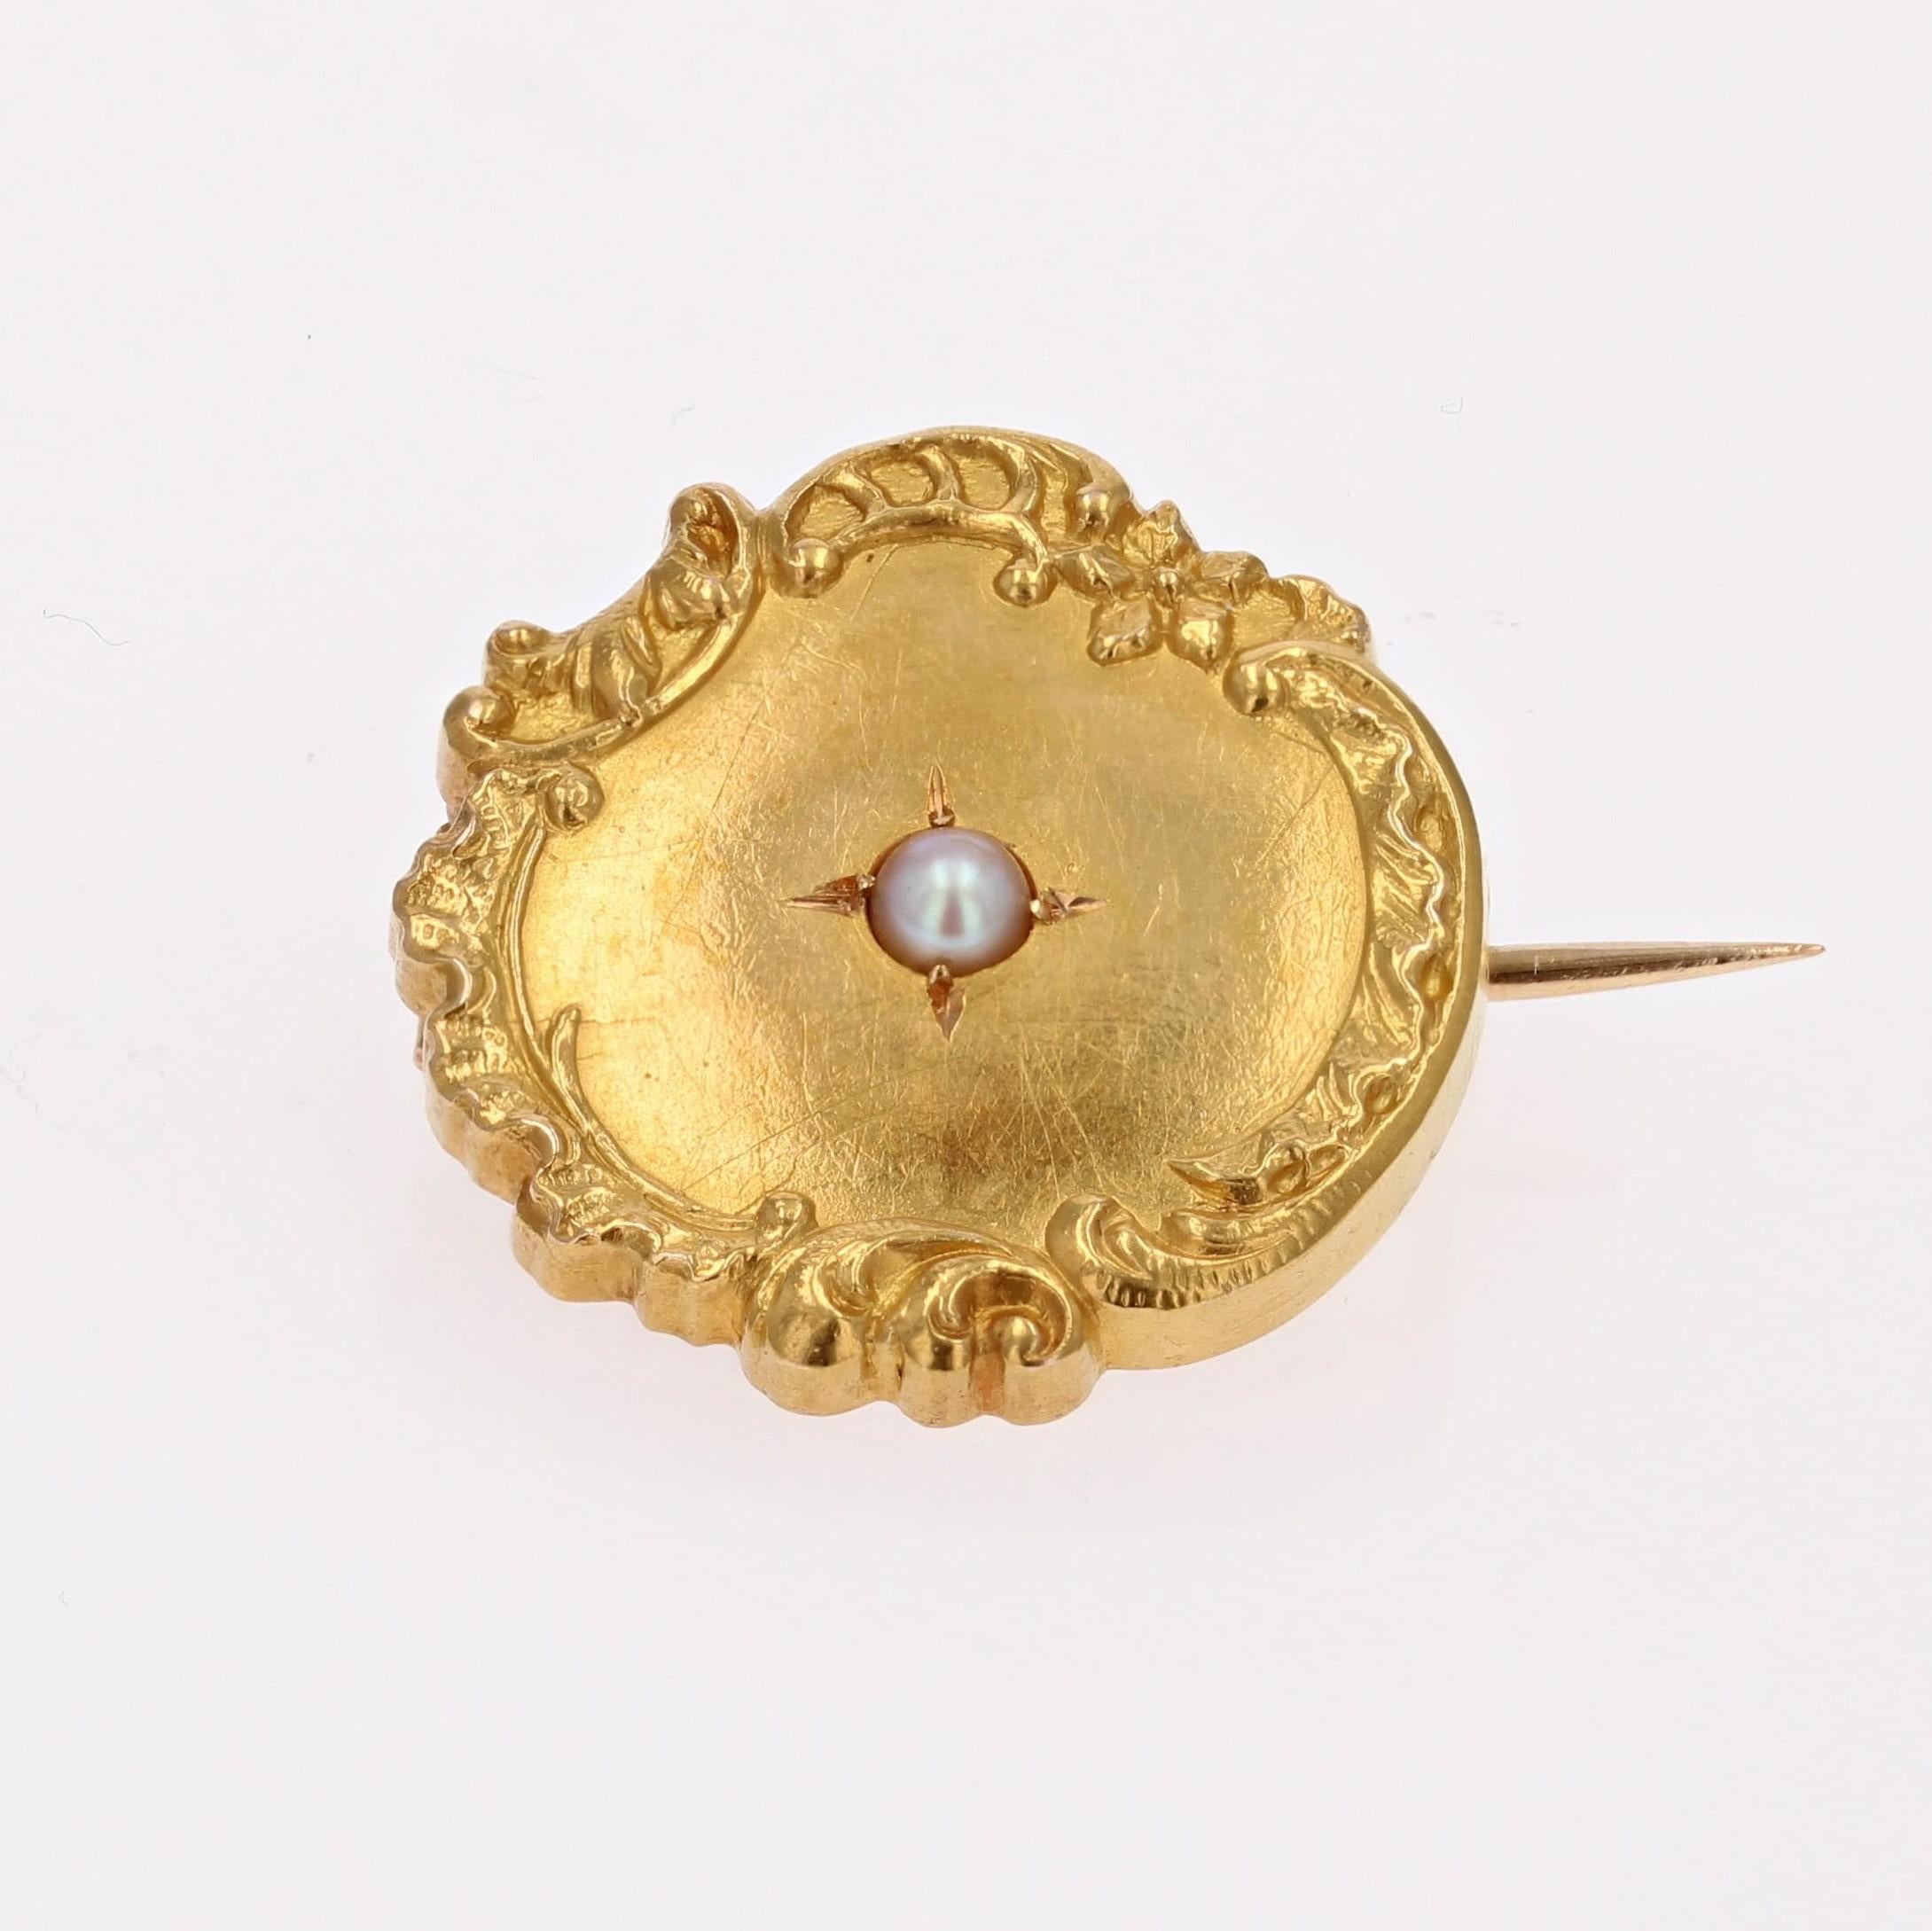 Brooch in 18 karat yellow gold, eagle head hallmark.
This round collar brooch in yellow gold is bordered by a floral and arabesque design and features a fine half-pearl in the center. The fastening system is a safety pin.
Pearl diameter : 2/2.5 mm